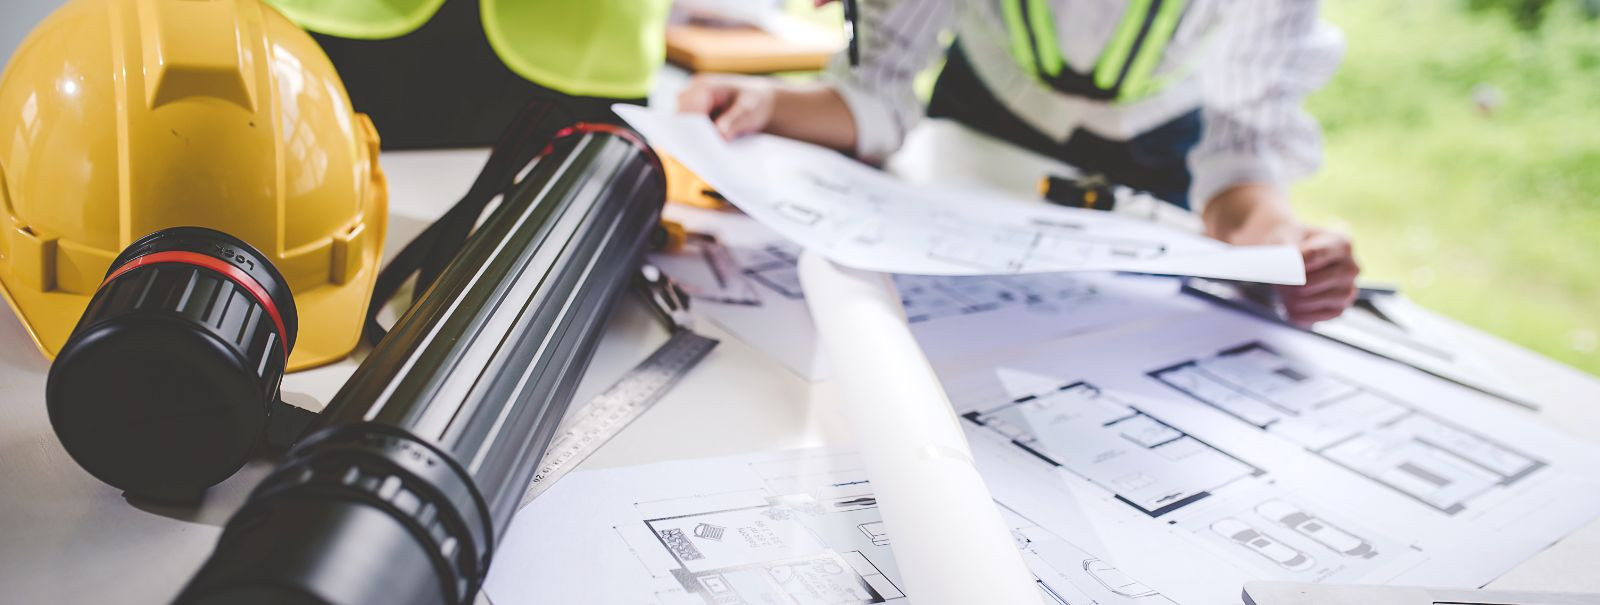 Construction audits are critical evaluations that scrutinize various aspects of a building project to ensure that all processes align with the contractual agree